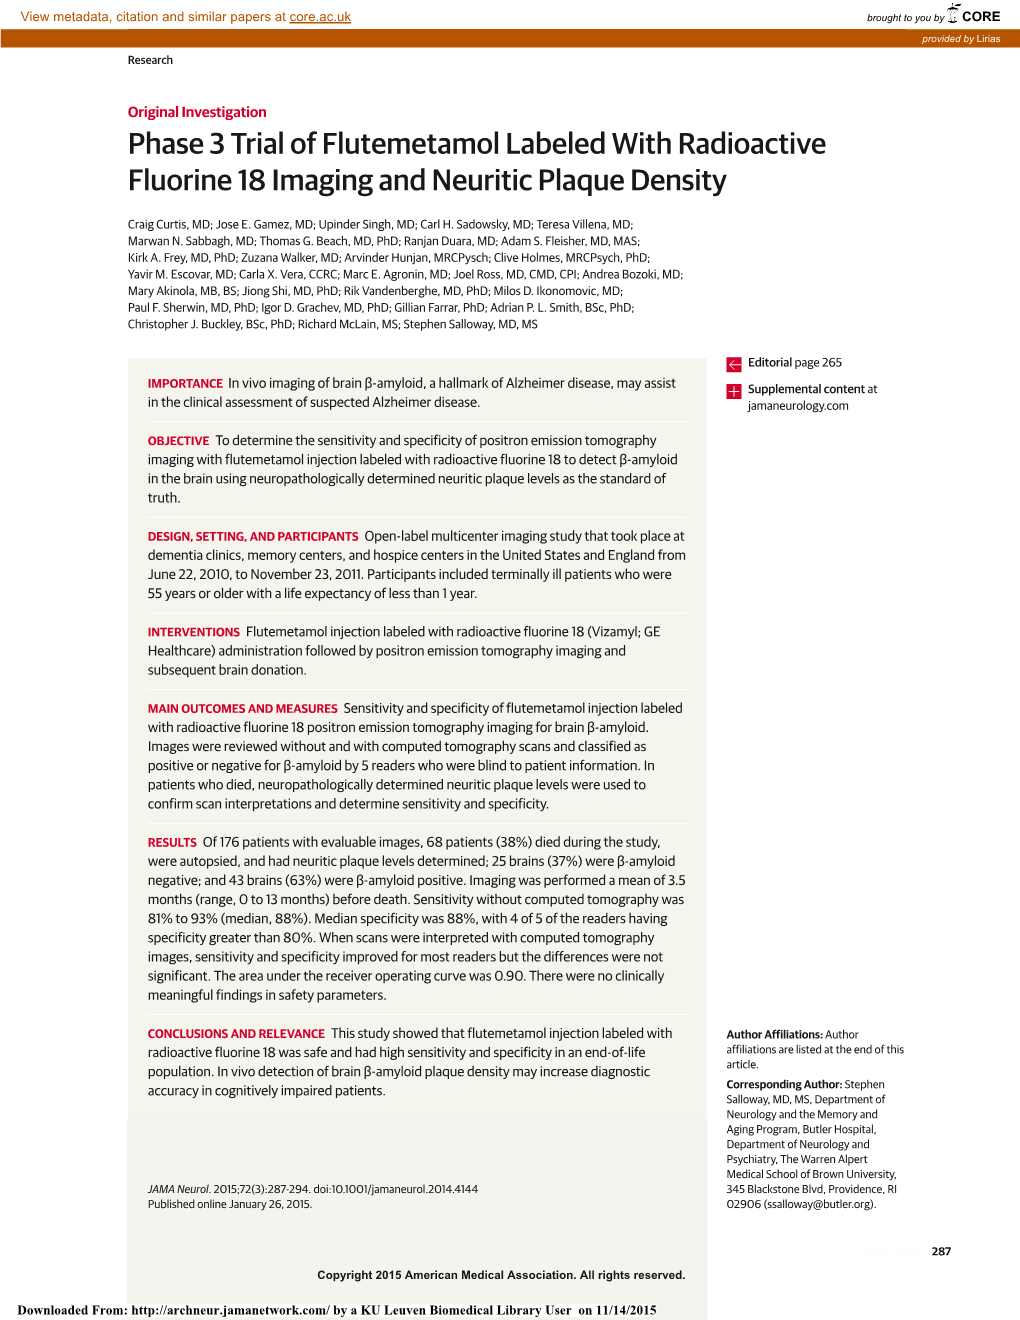 Phase 3 Trial of Flutemetamol Labeled with Radioactive Fluorine 18 Imaging and Neuritic Plaque Density